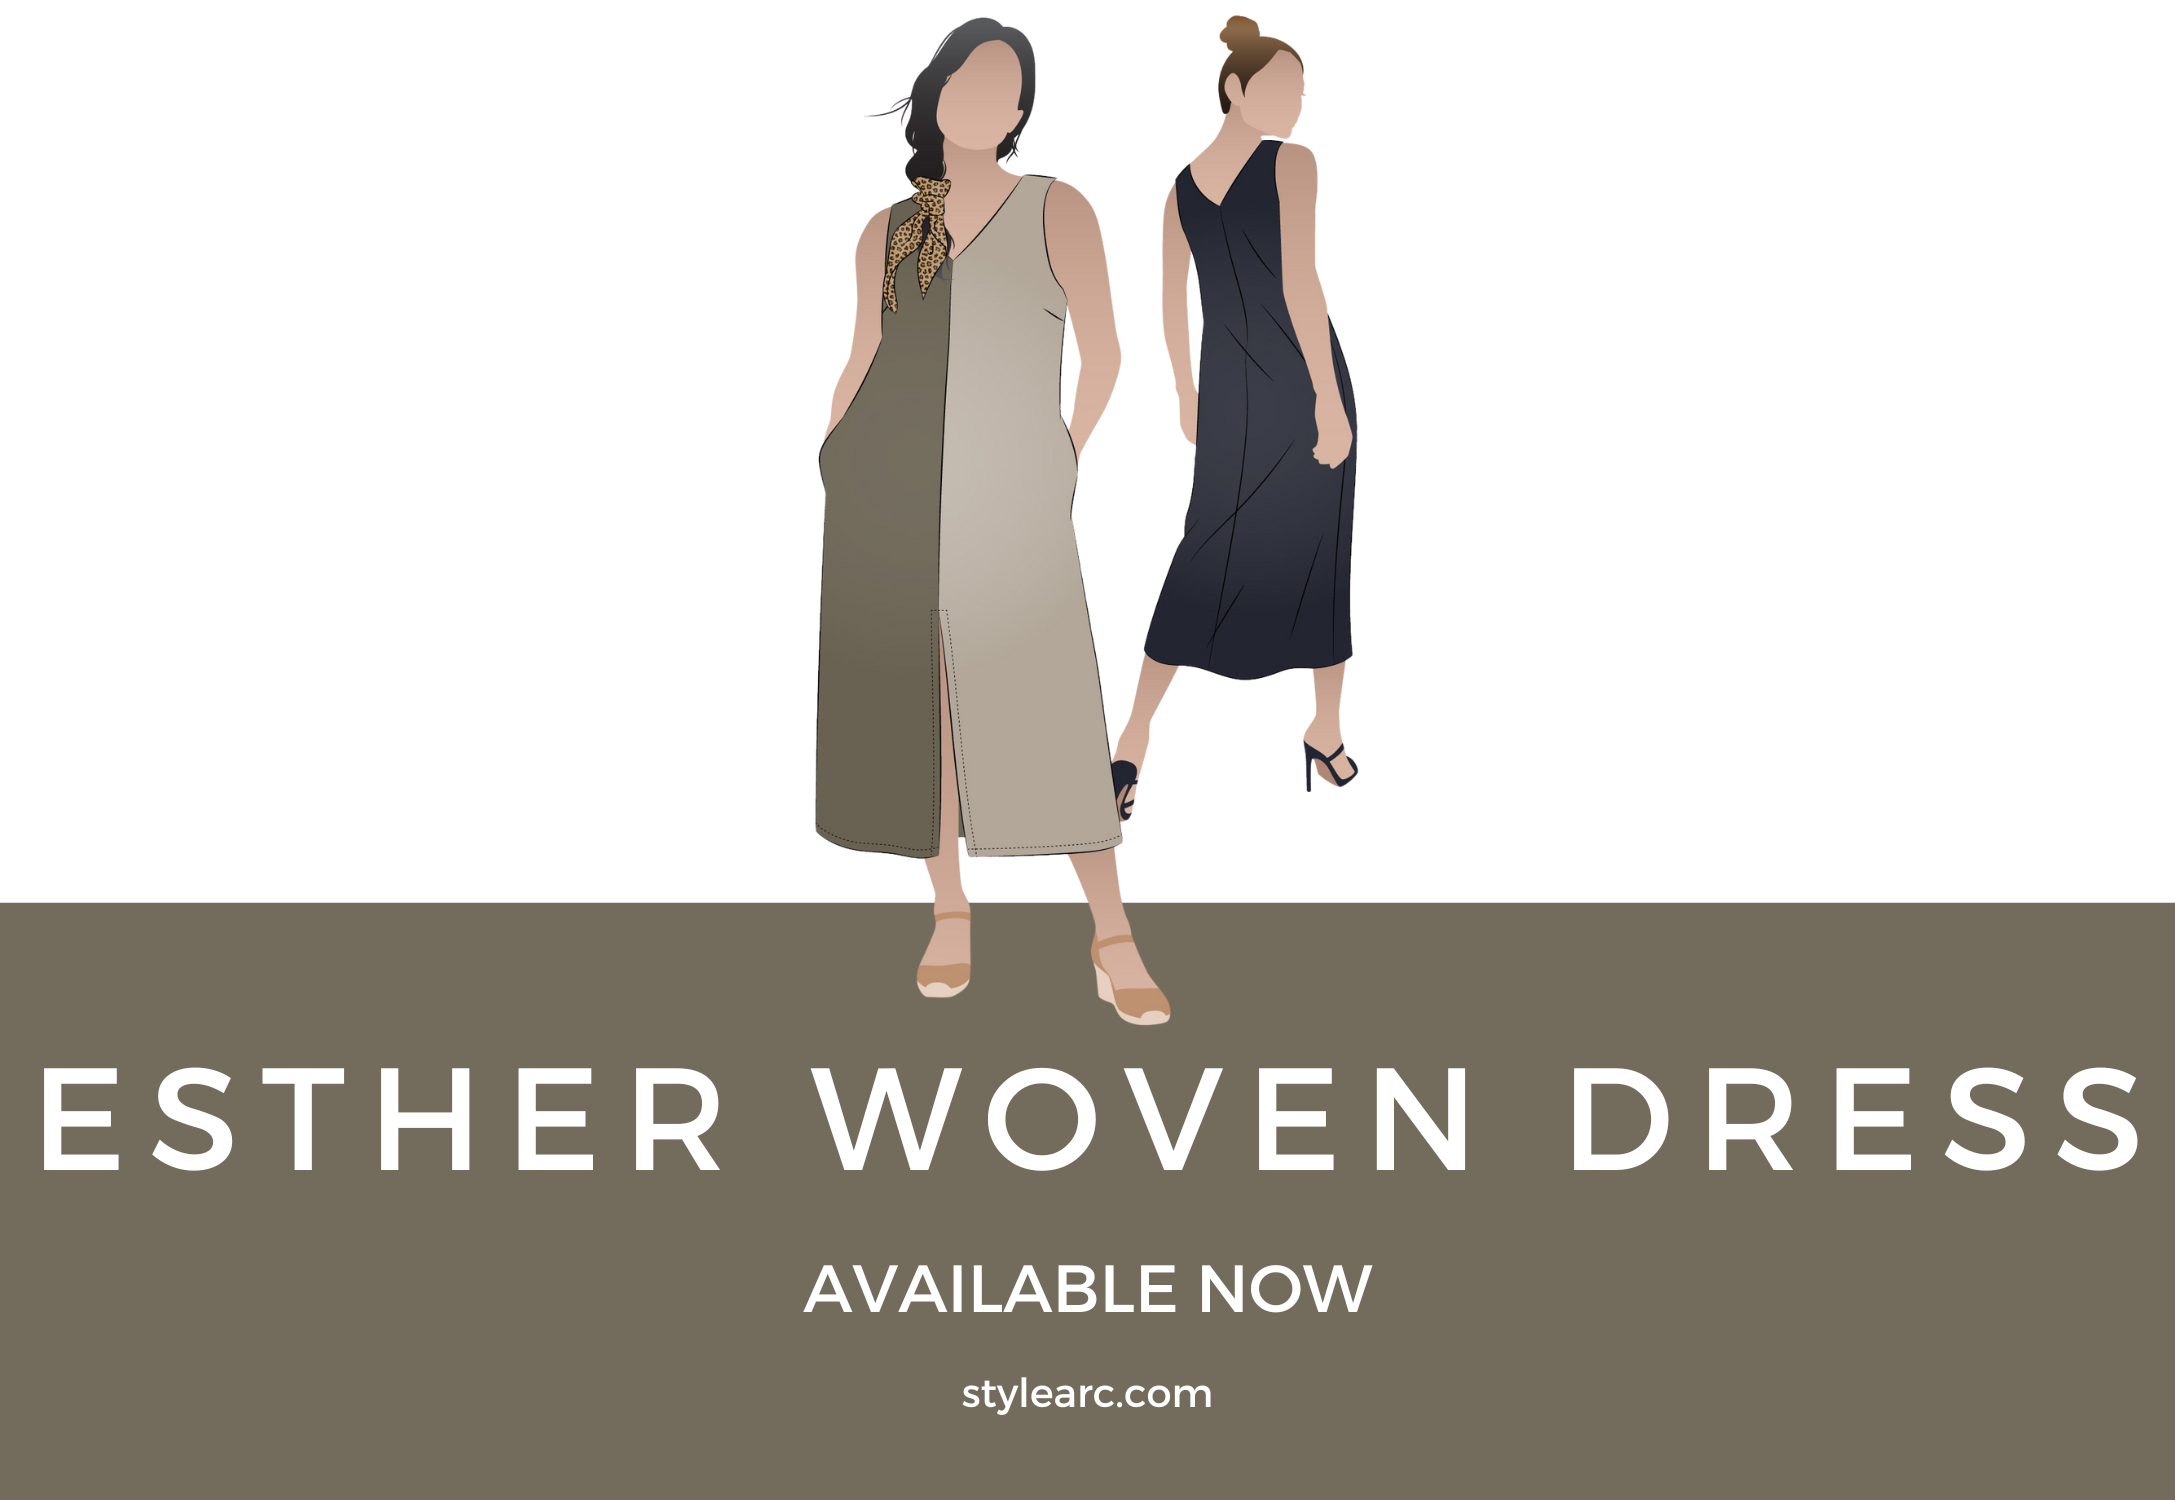 Esther Woven Dress - New Release